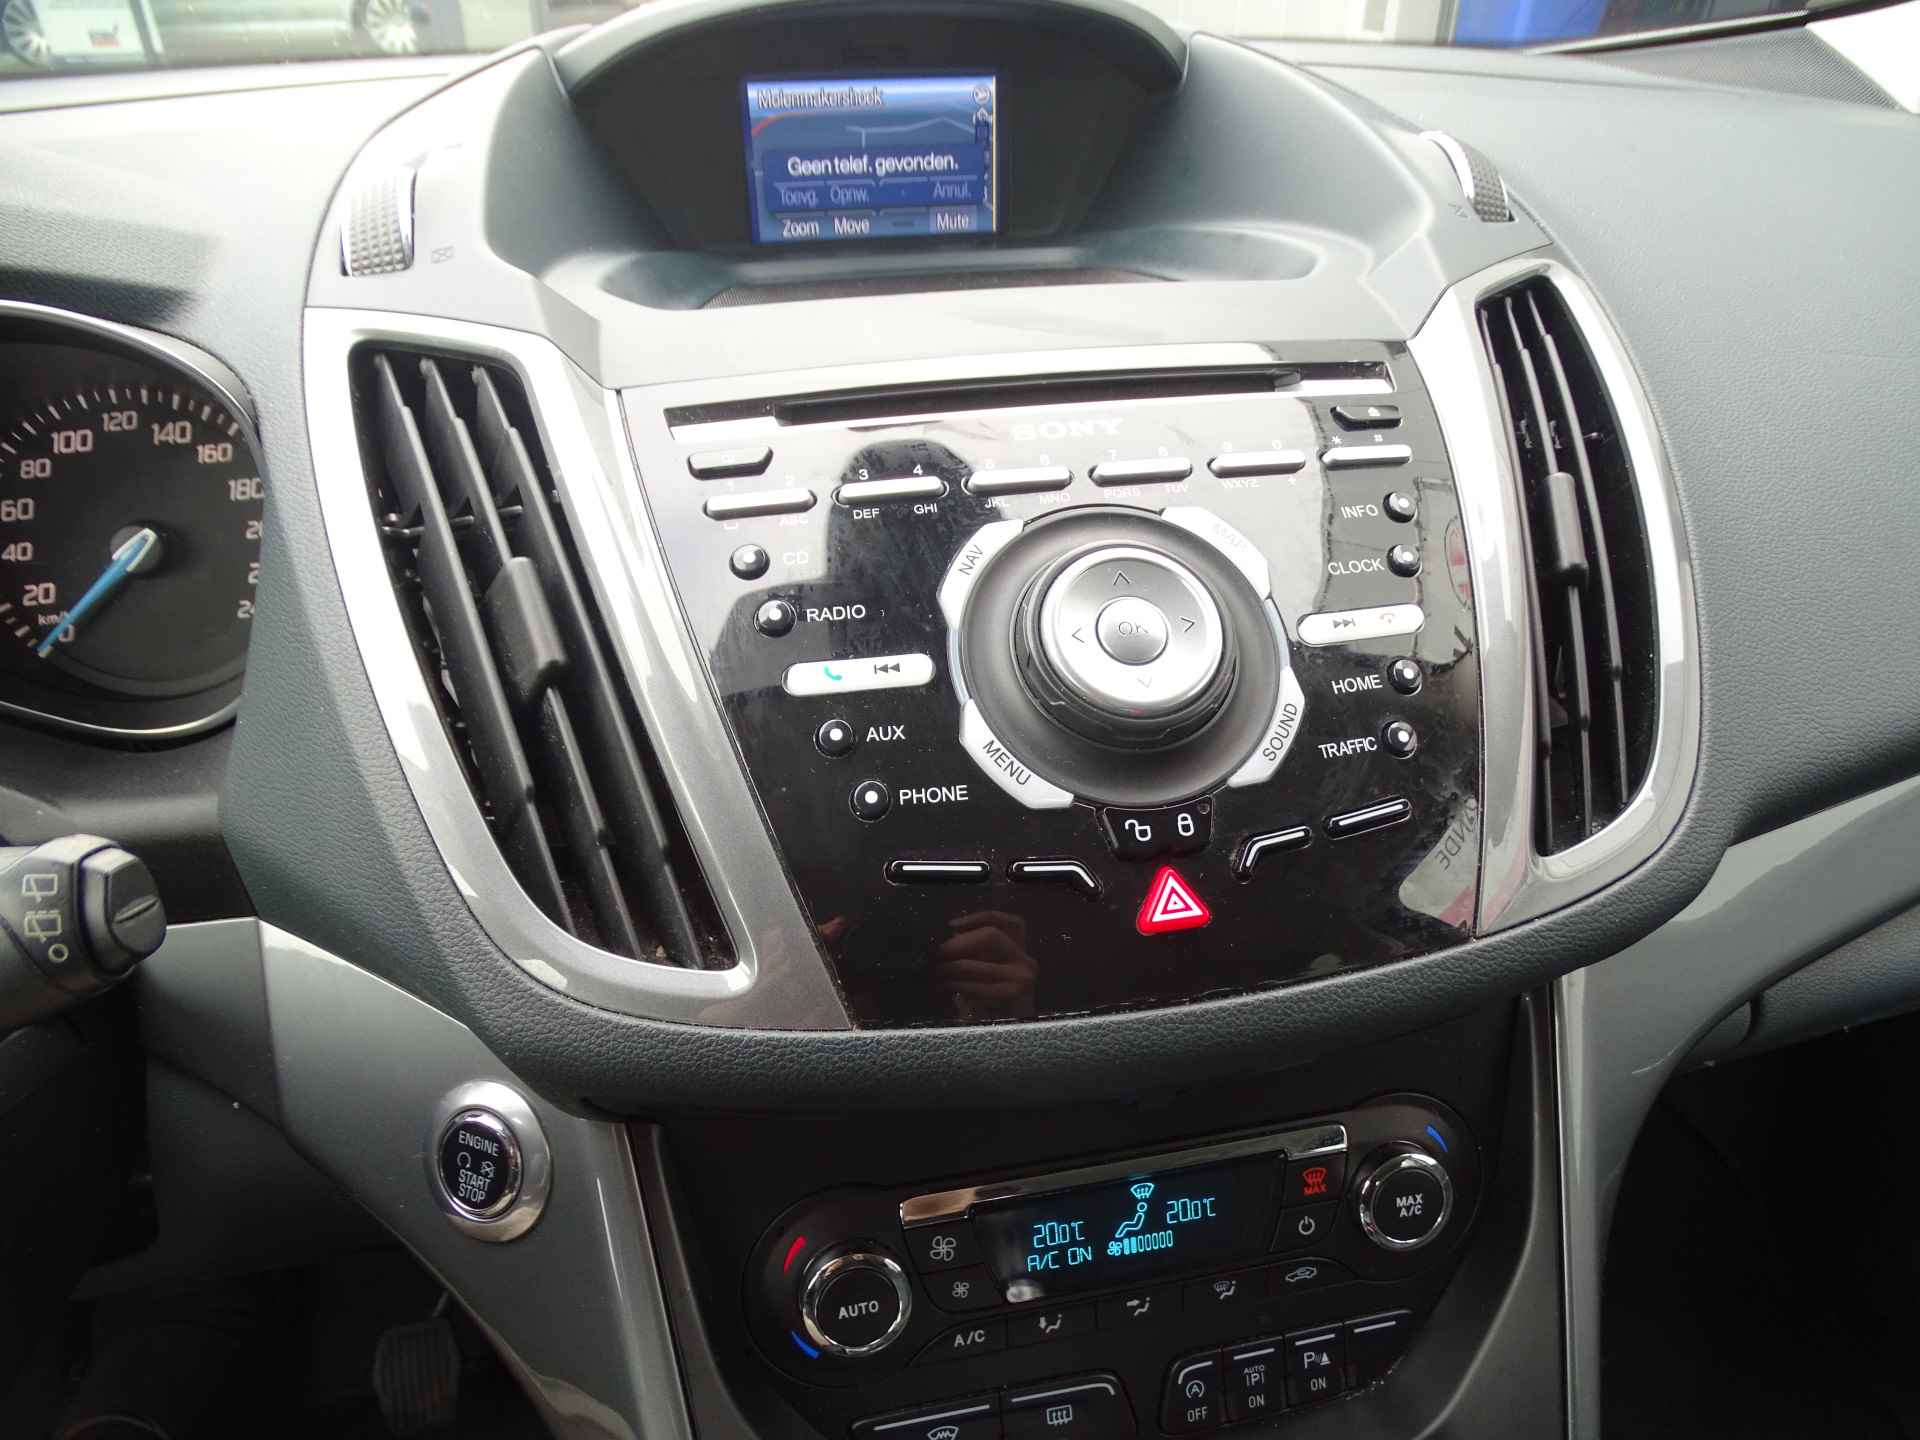 Ford Grand C-Max 1.0 Ed Plus 7 PERSOONS, Cruise Control, Camera, Compleet, NAP! - 56/70